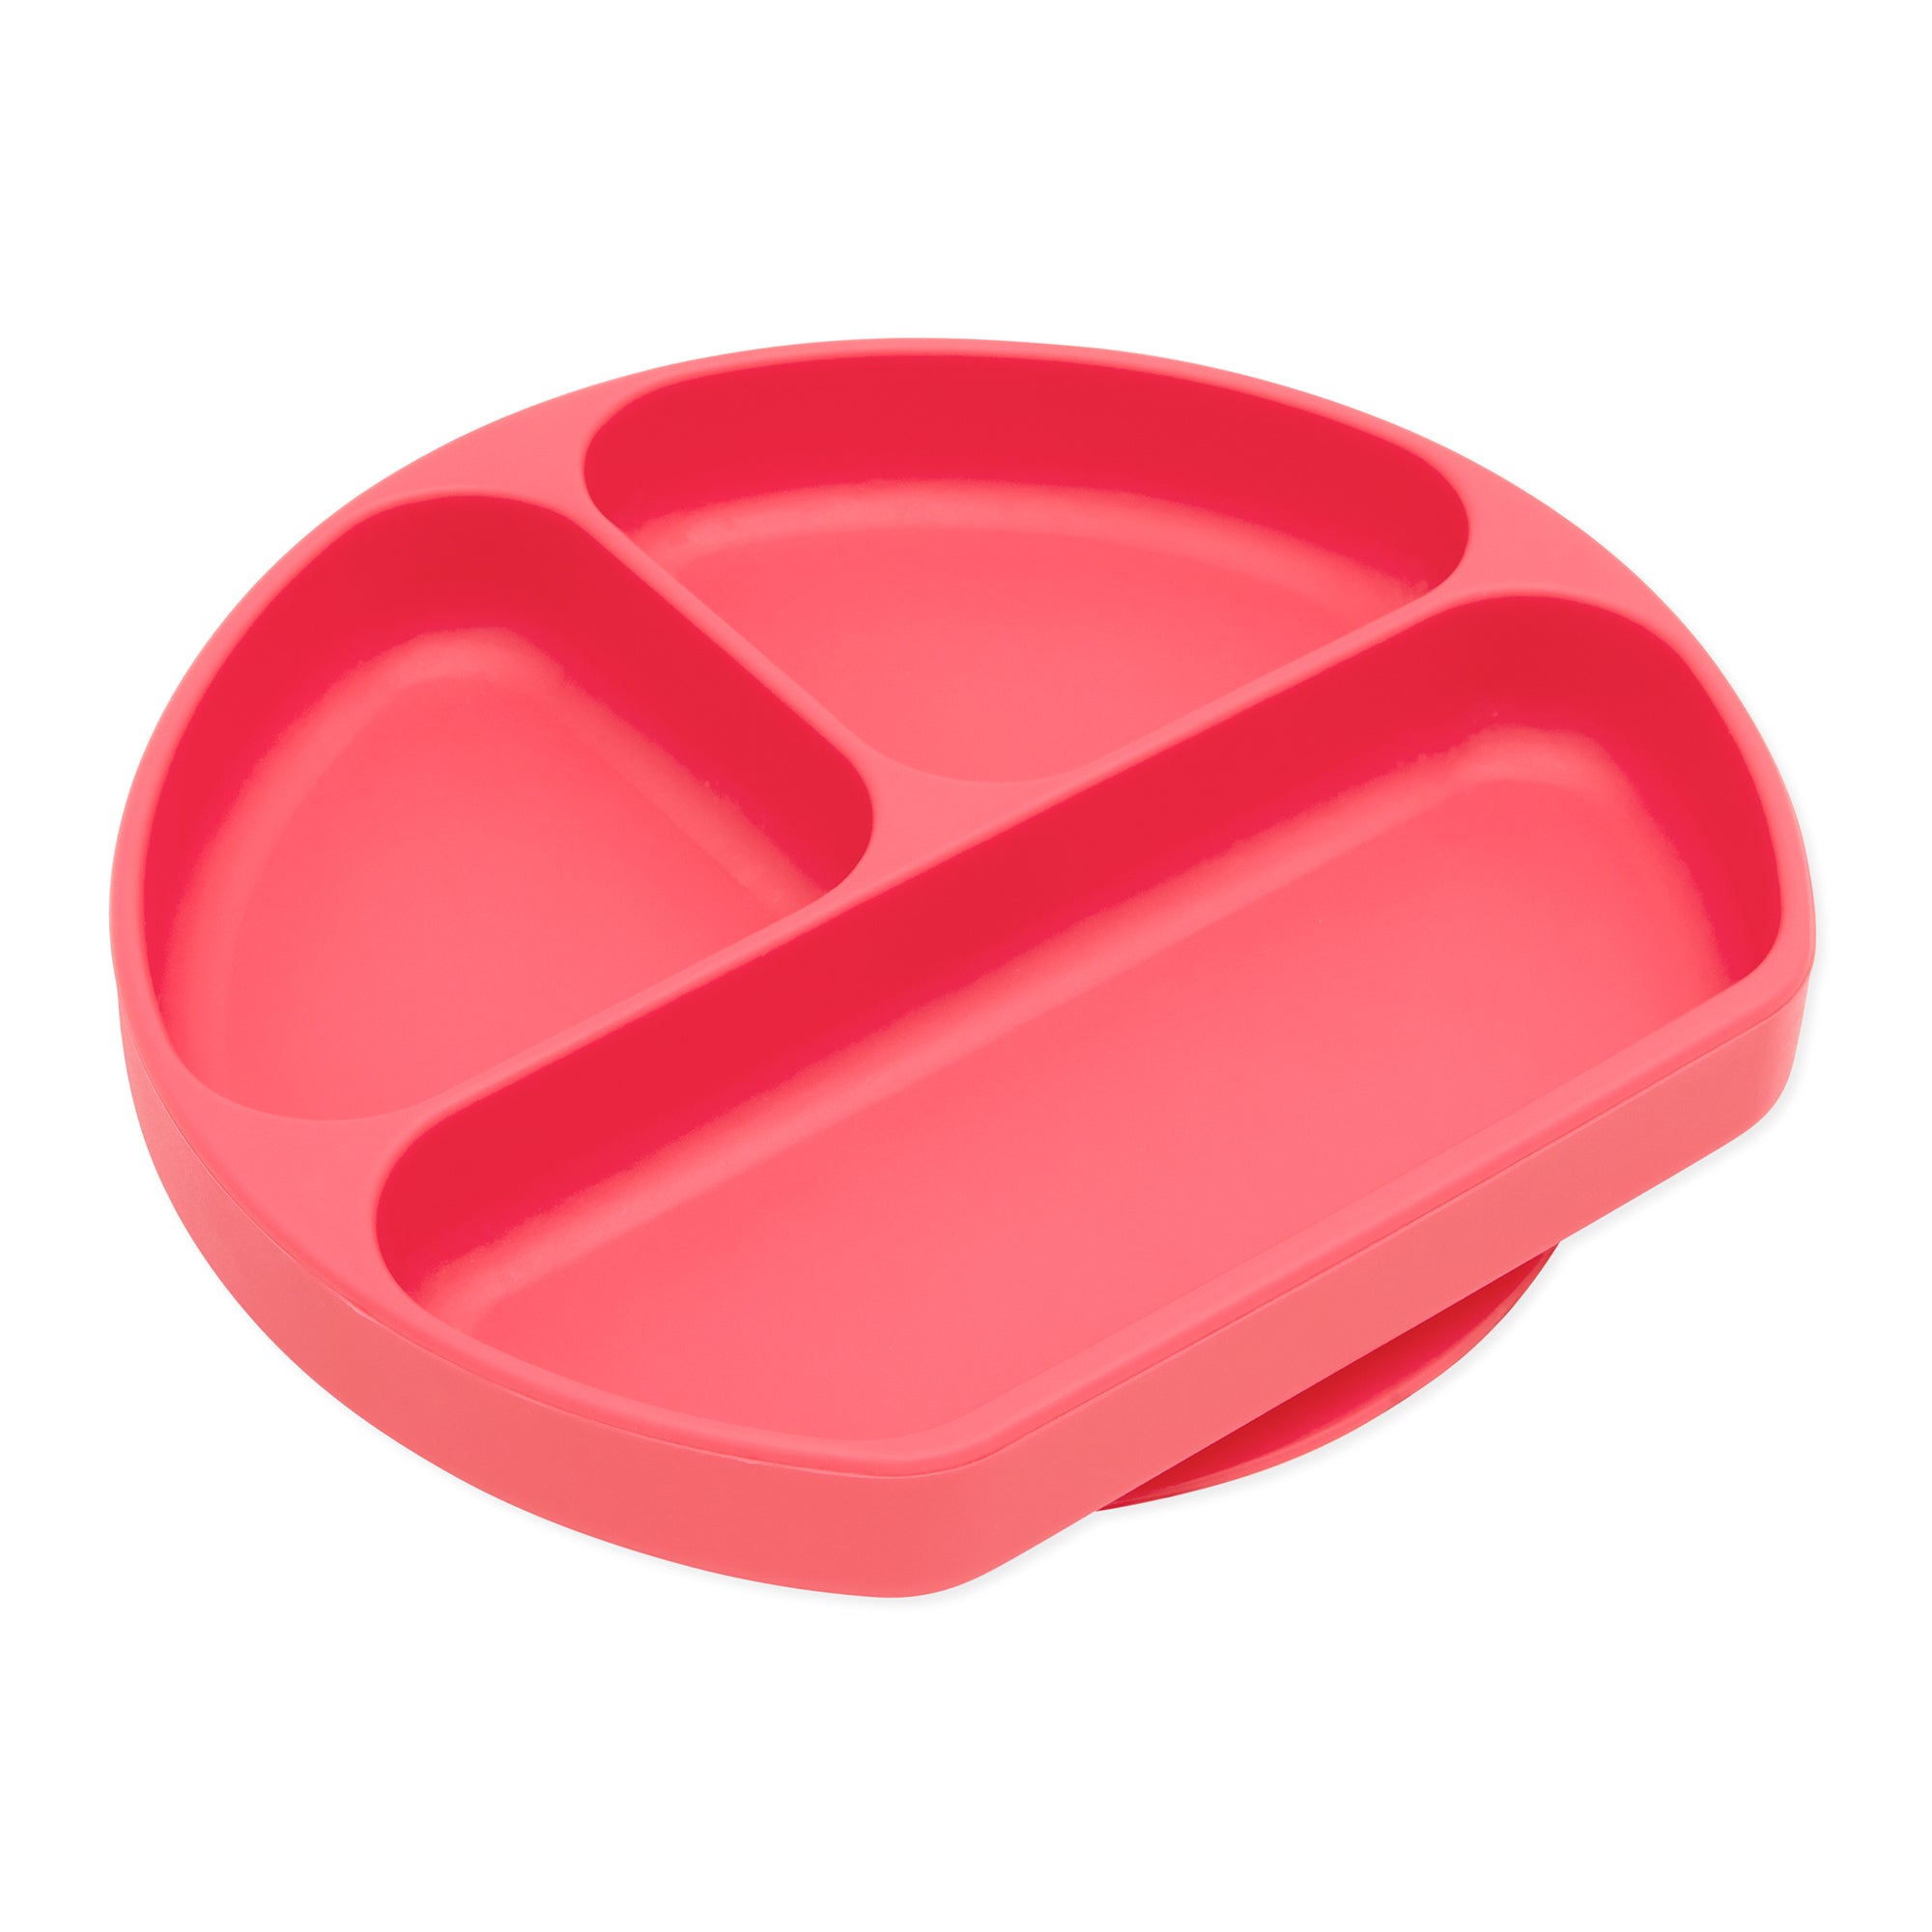 Silicone Grip Dish: Red